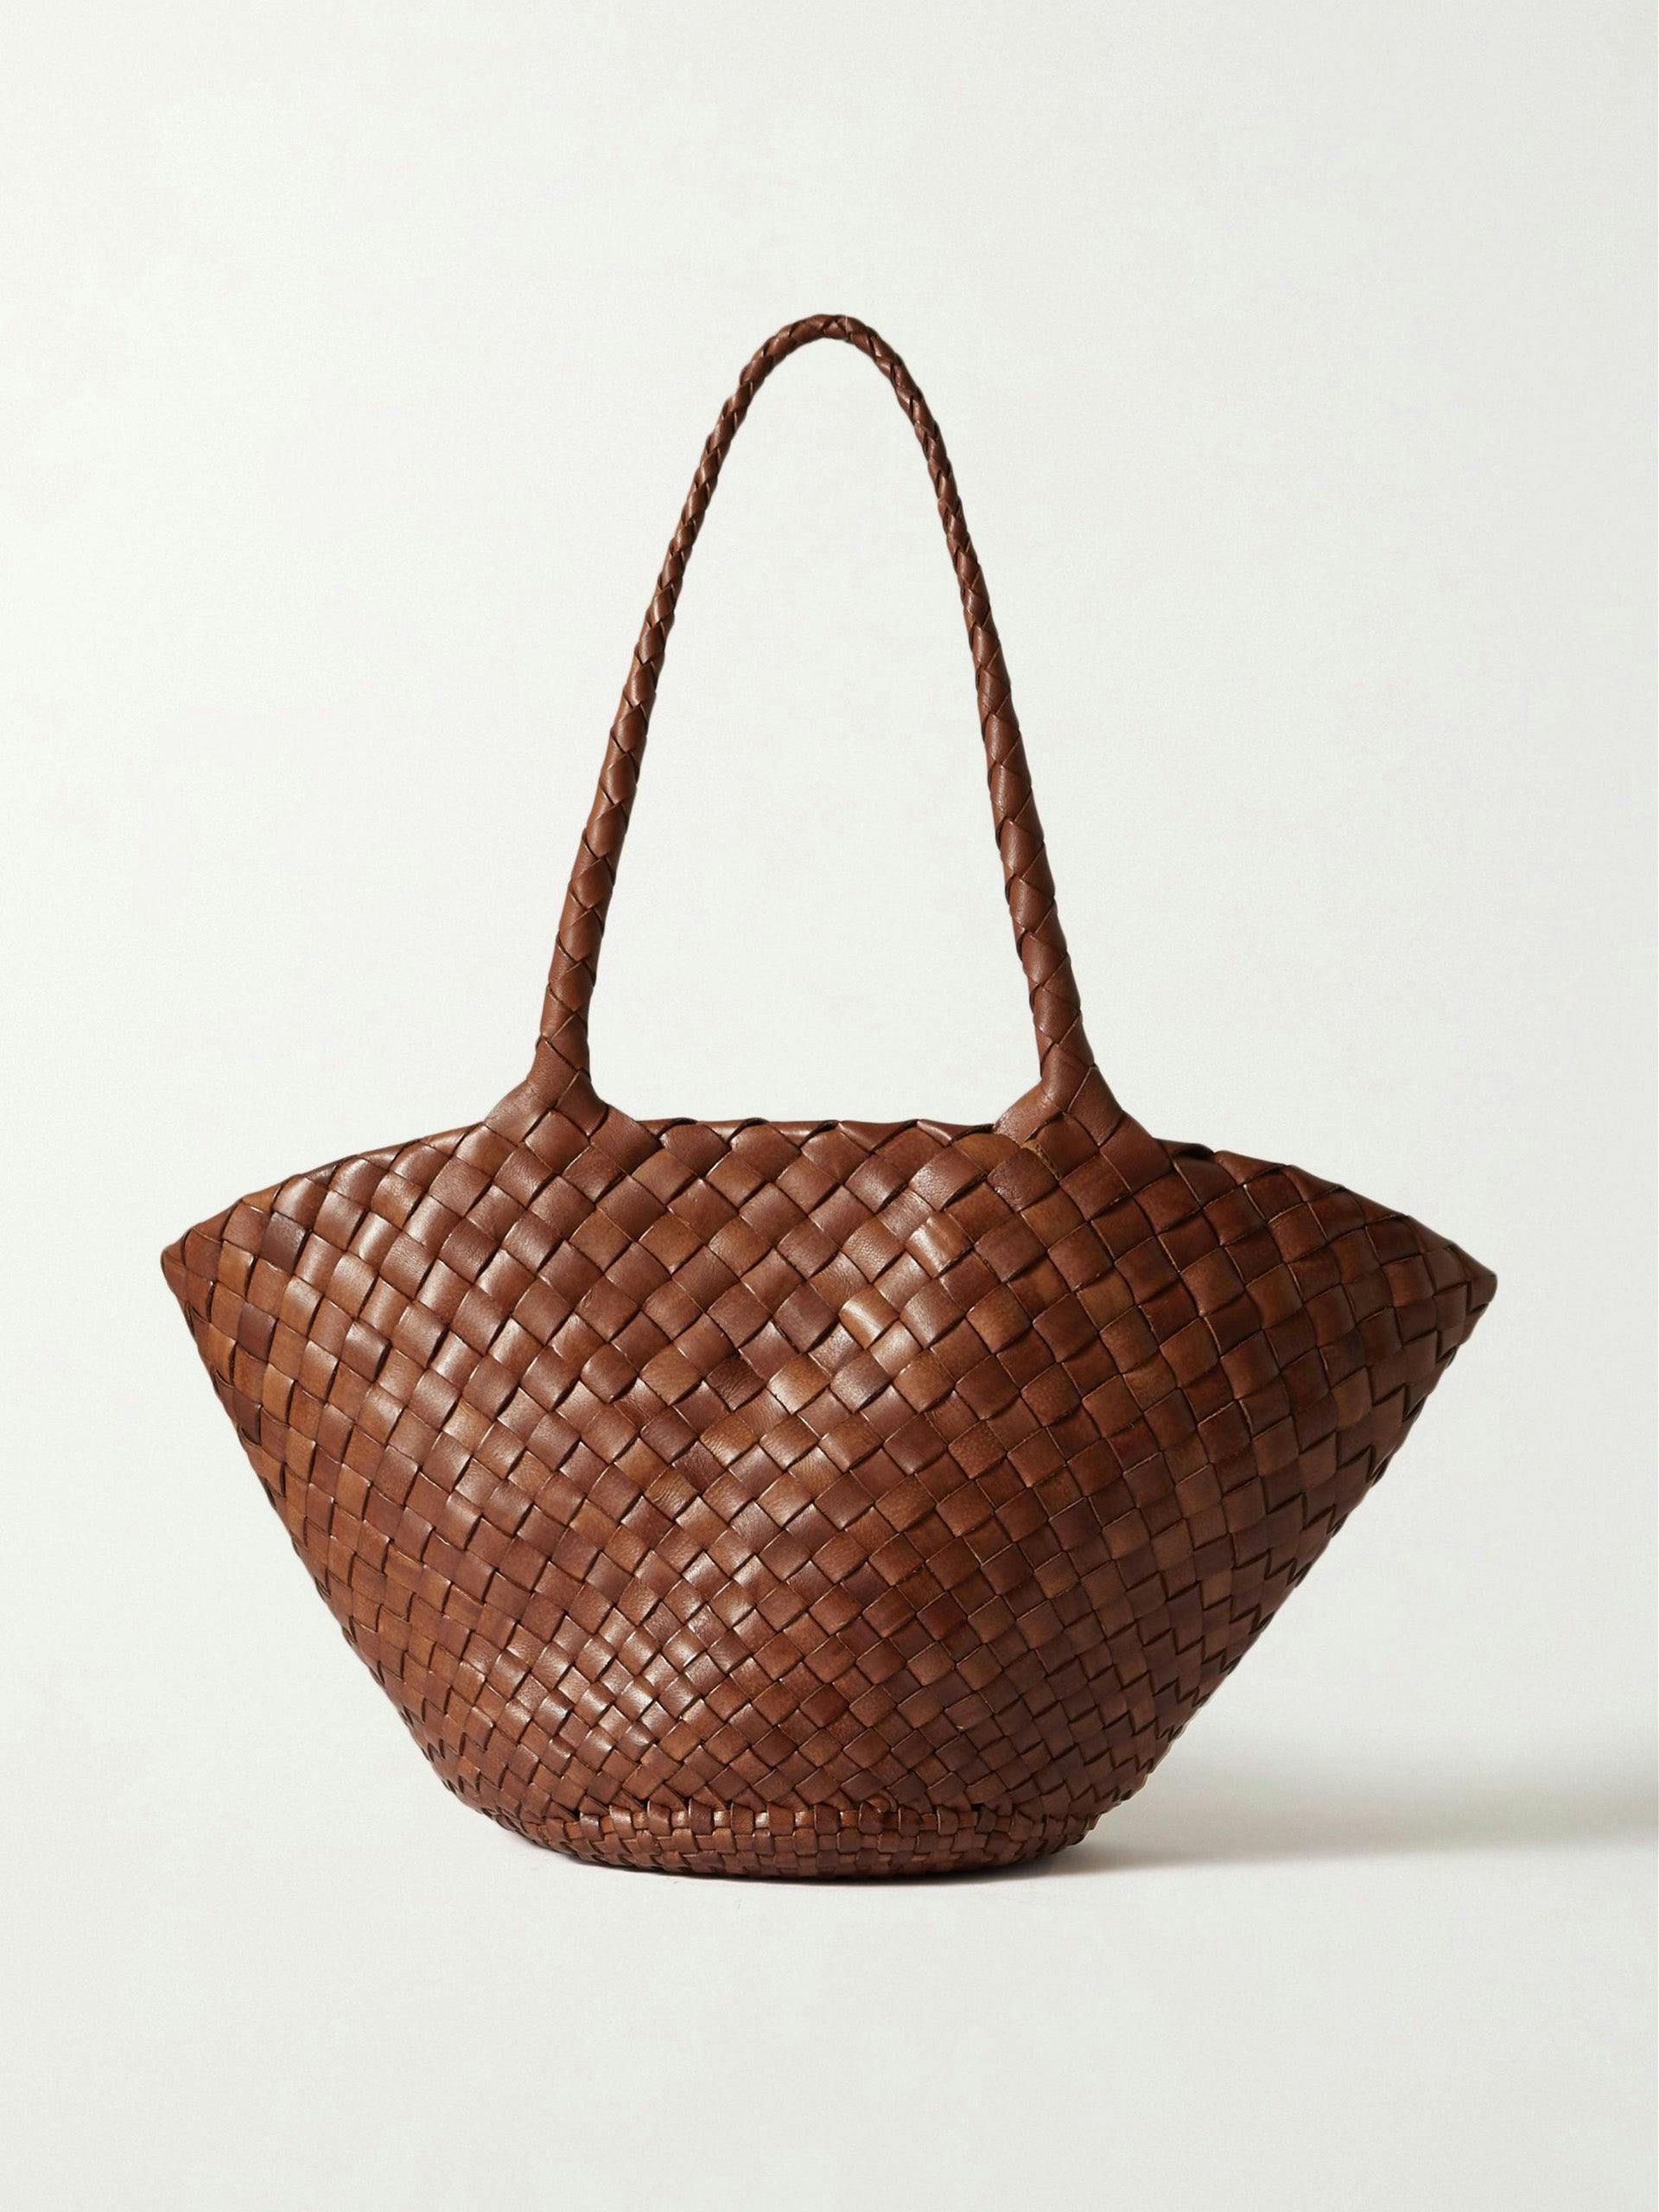 Brown woven leather tote